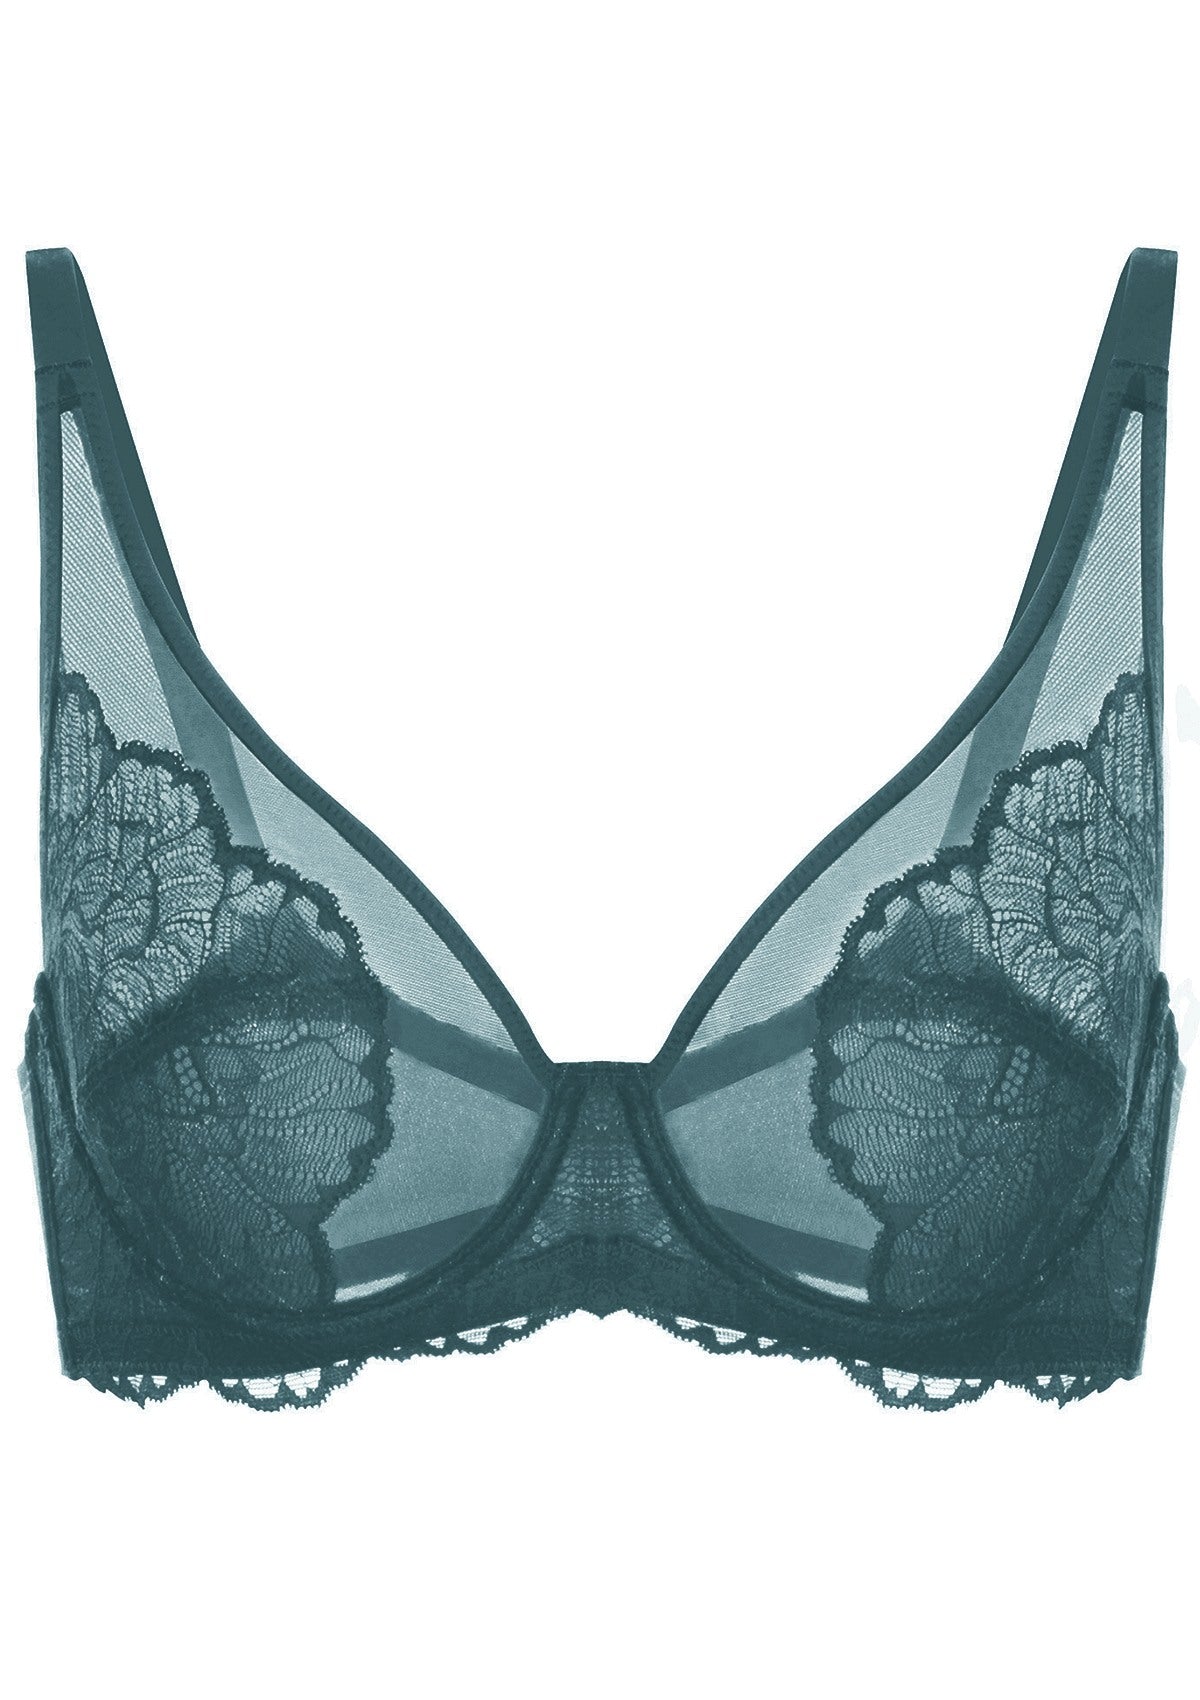 HSIA Blossom Full Figure See-Through Lace Bra For Side And Back Fat - Dark Blue / 36 / D